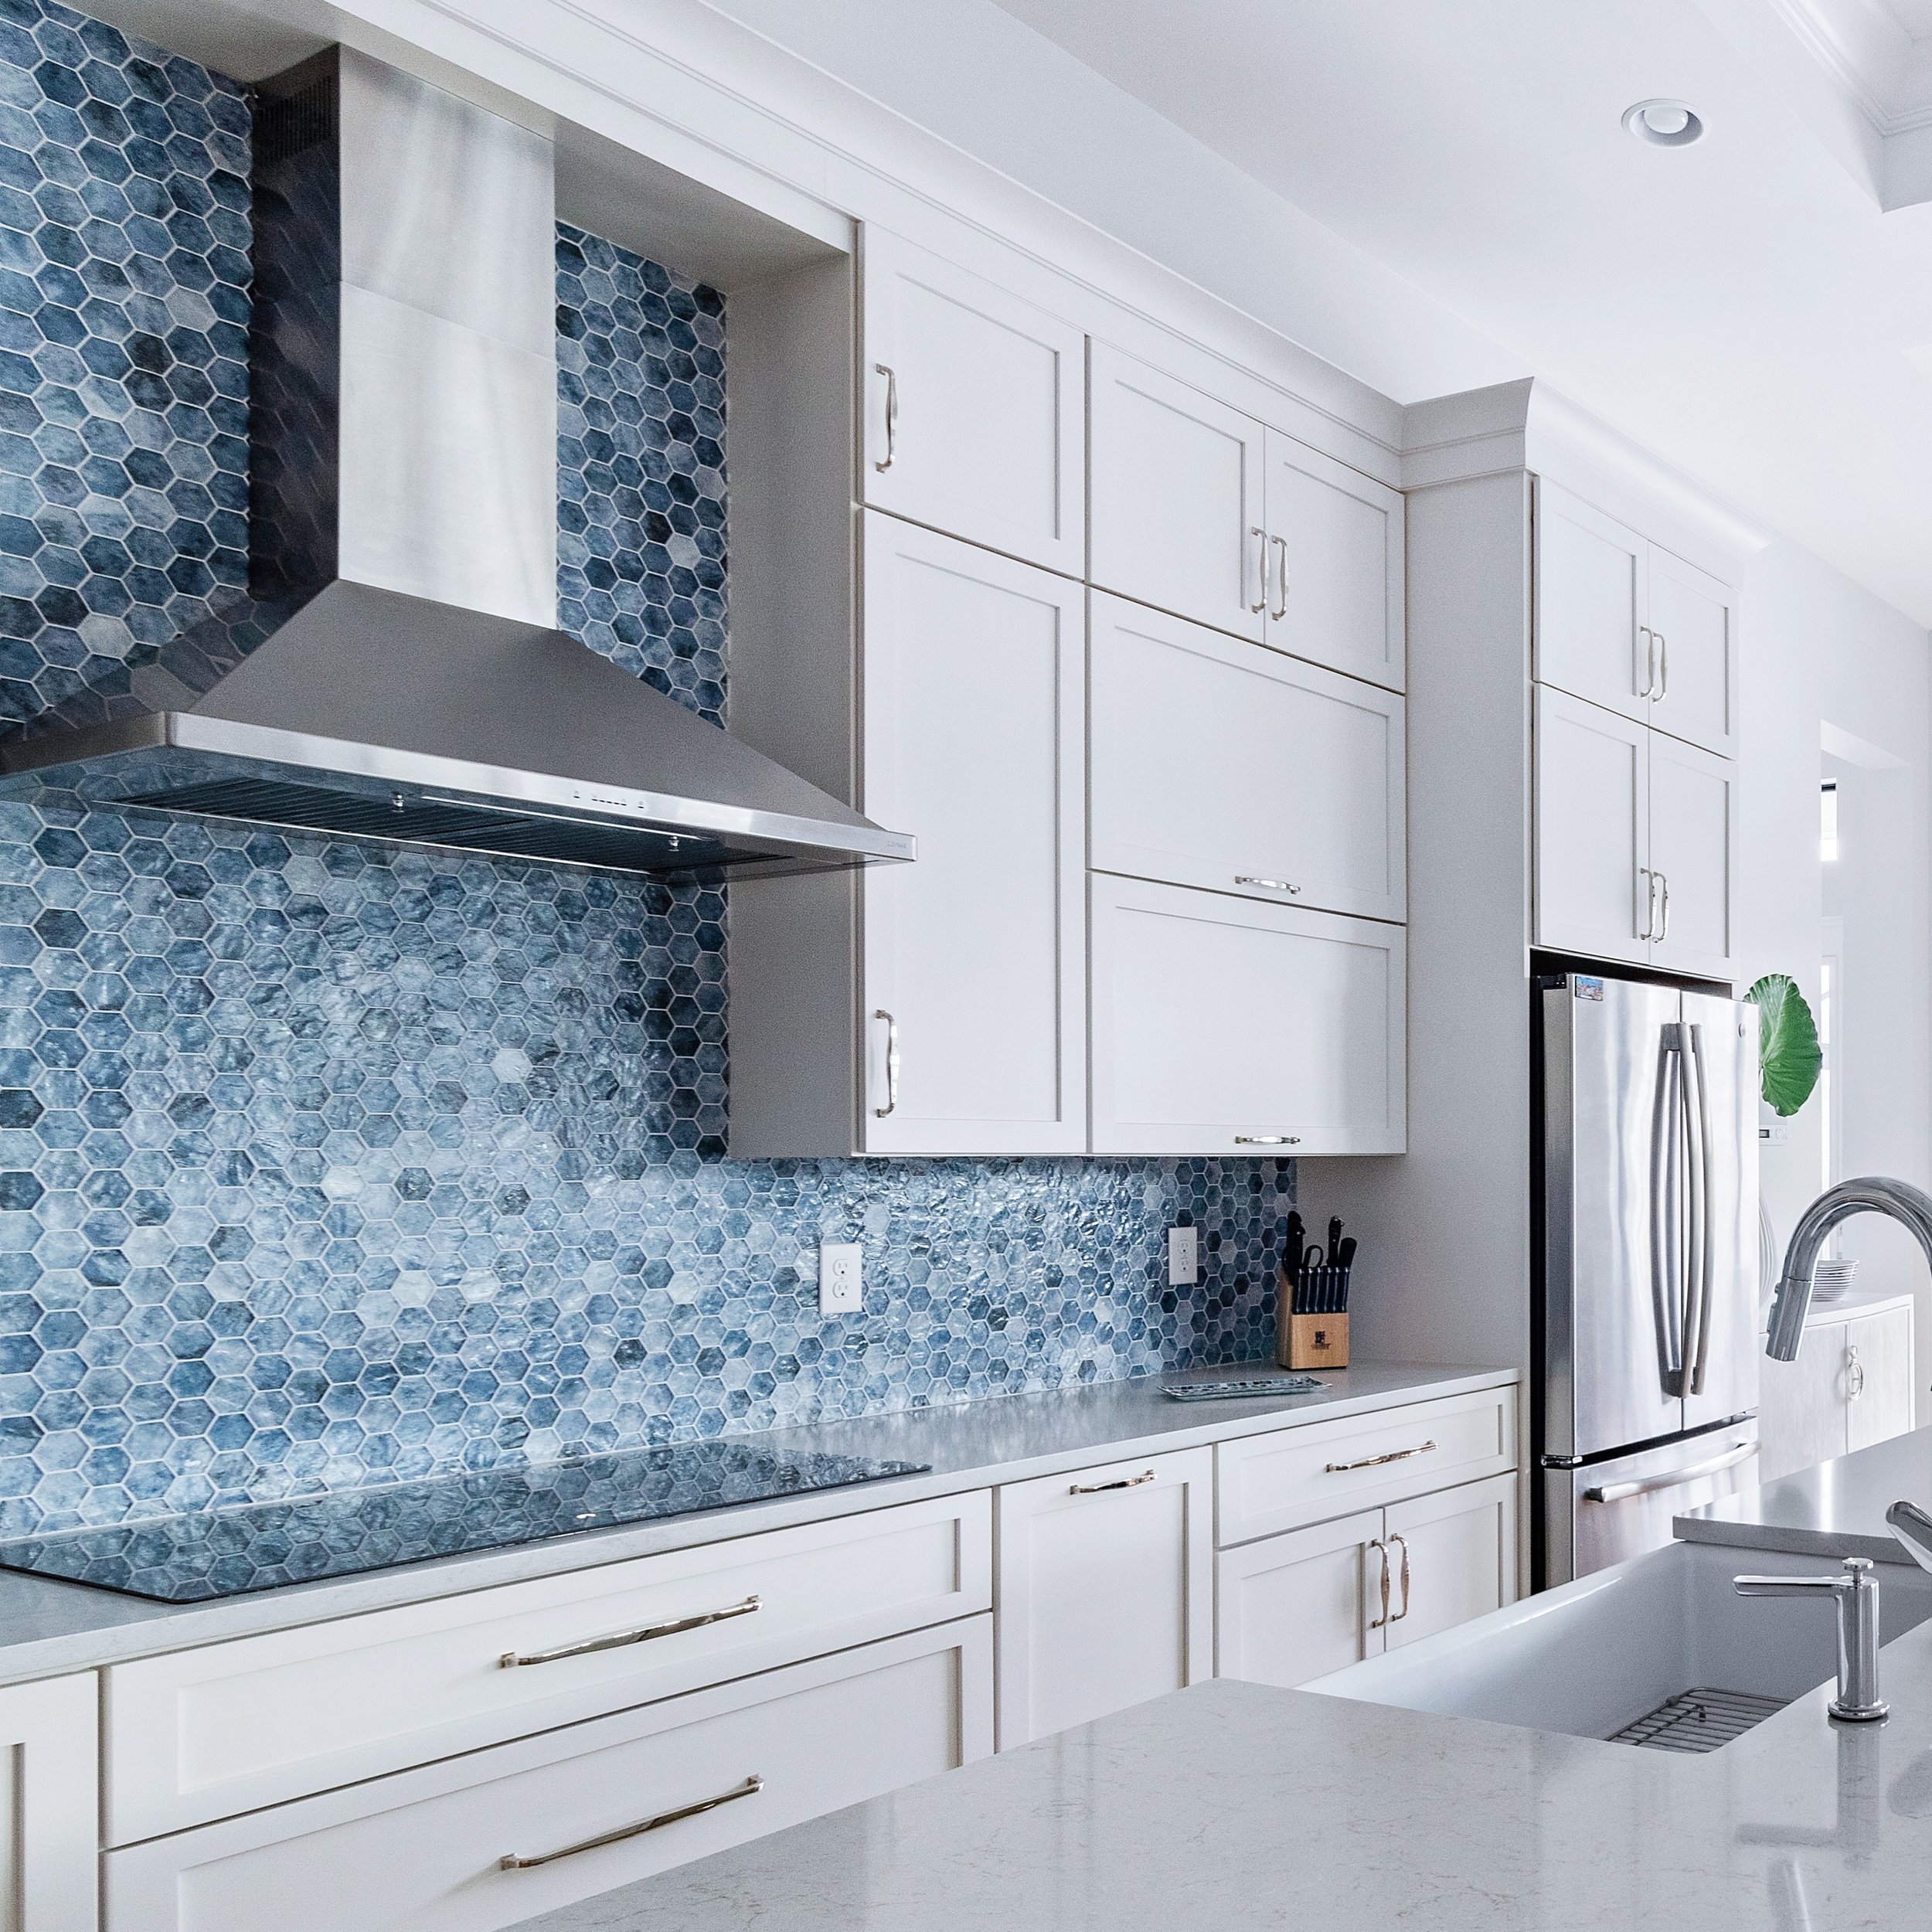 What does your backsplash say about your kitchen? We love the touch of color in this all-white kitchen. Perfect for this coastal home.💙 Get inspired @sandraasdourianinteriors #kitchendesign #backsplash #design #loveyourhome #designer #naplesinterior